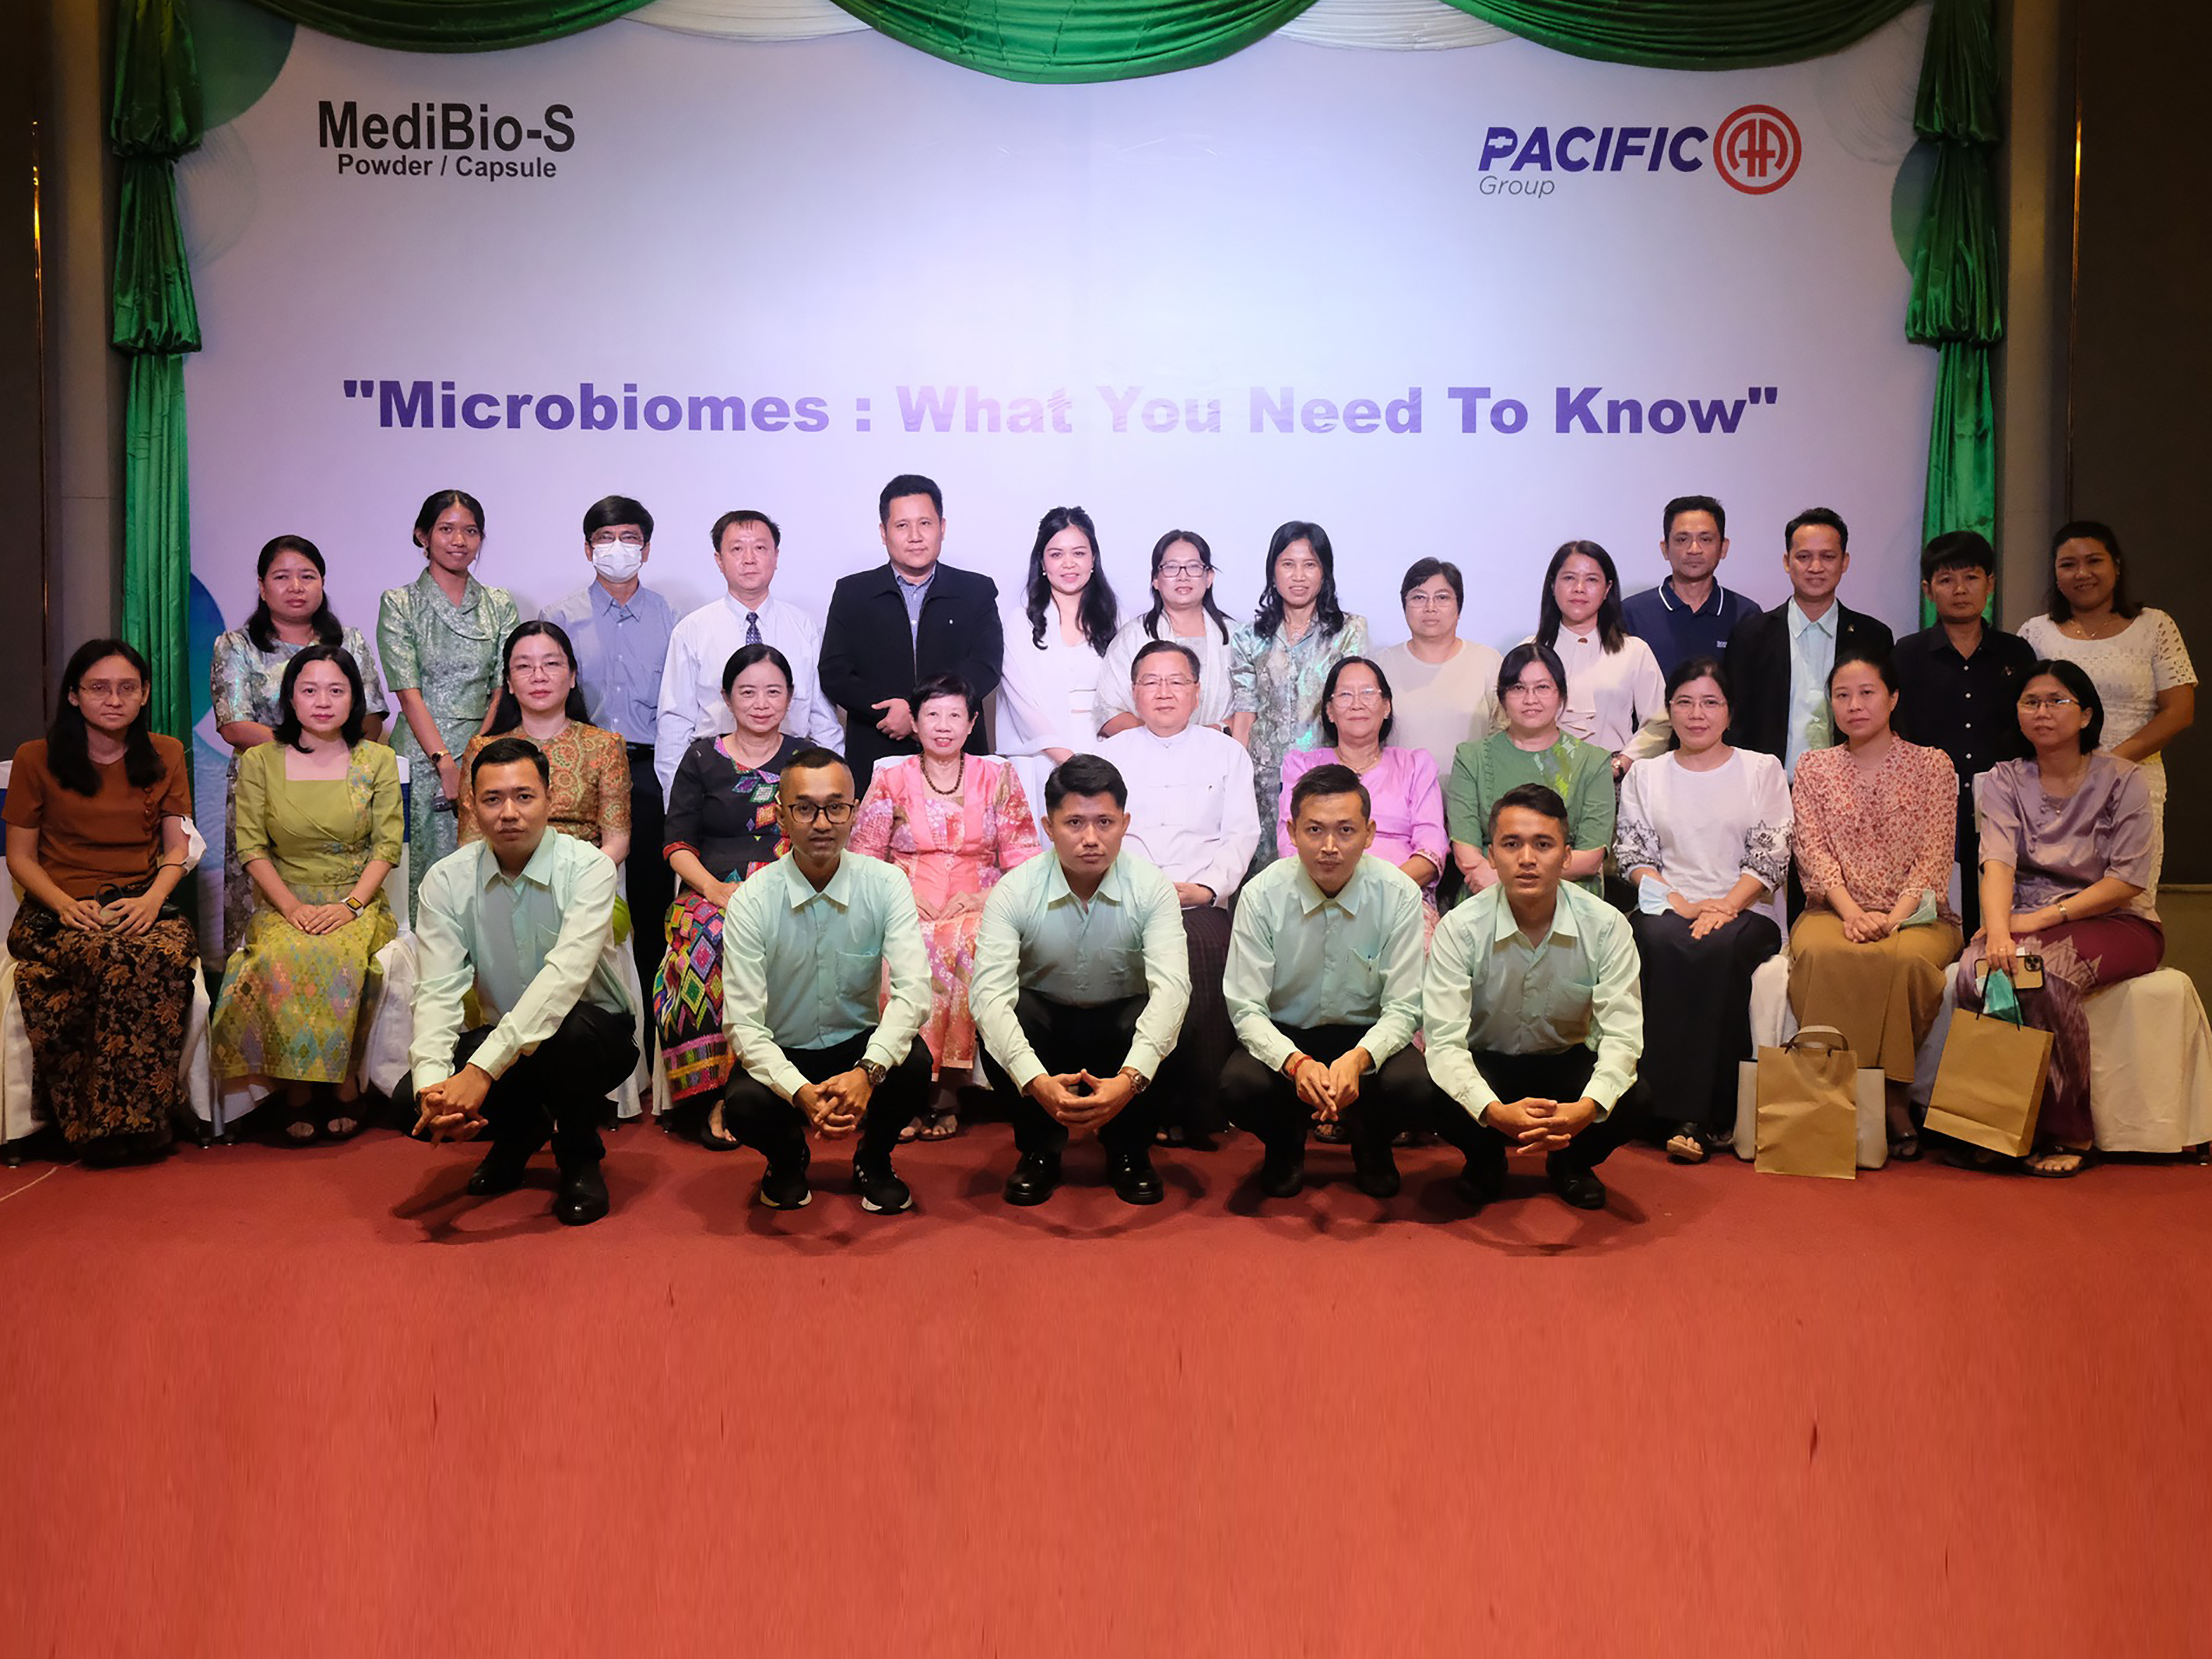 Hybrid Webinar on "Microbiomes: What You Need to Know" Organized by AA Medical Products Ltd